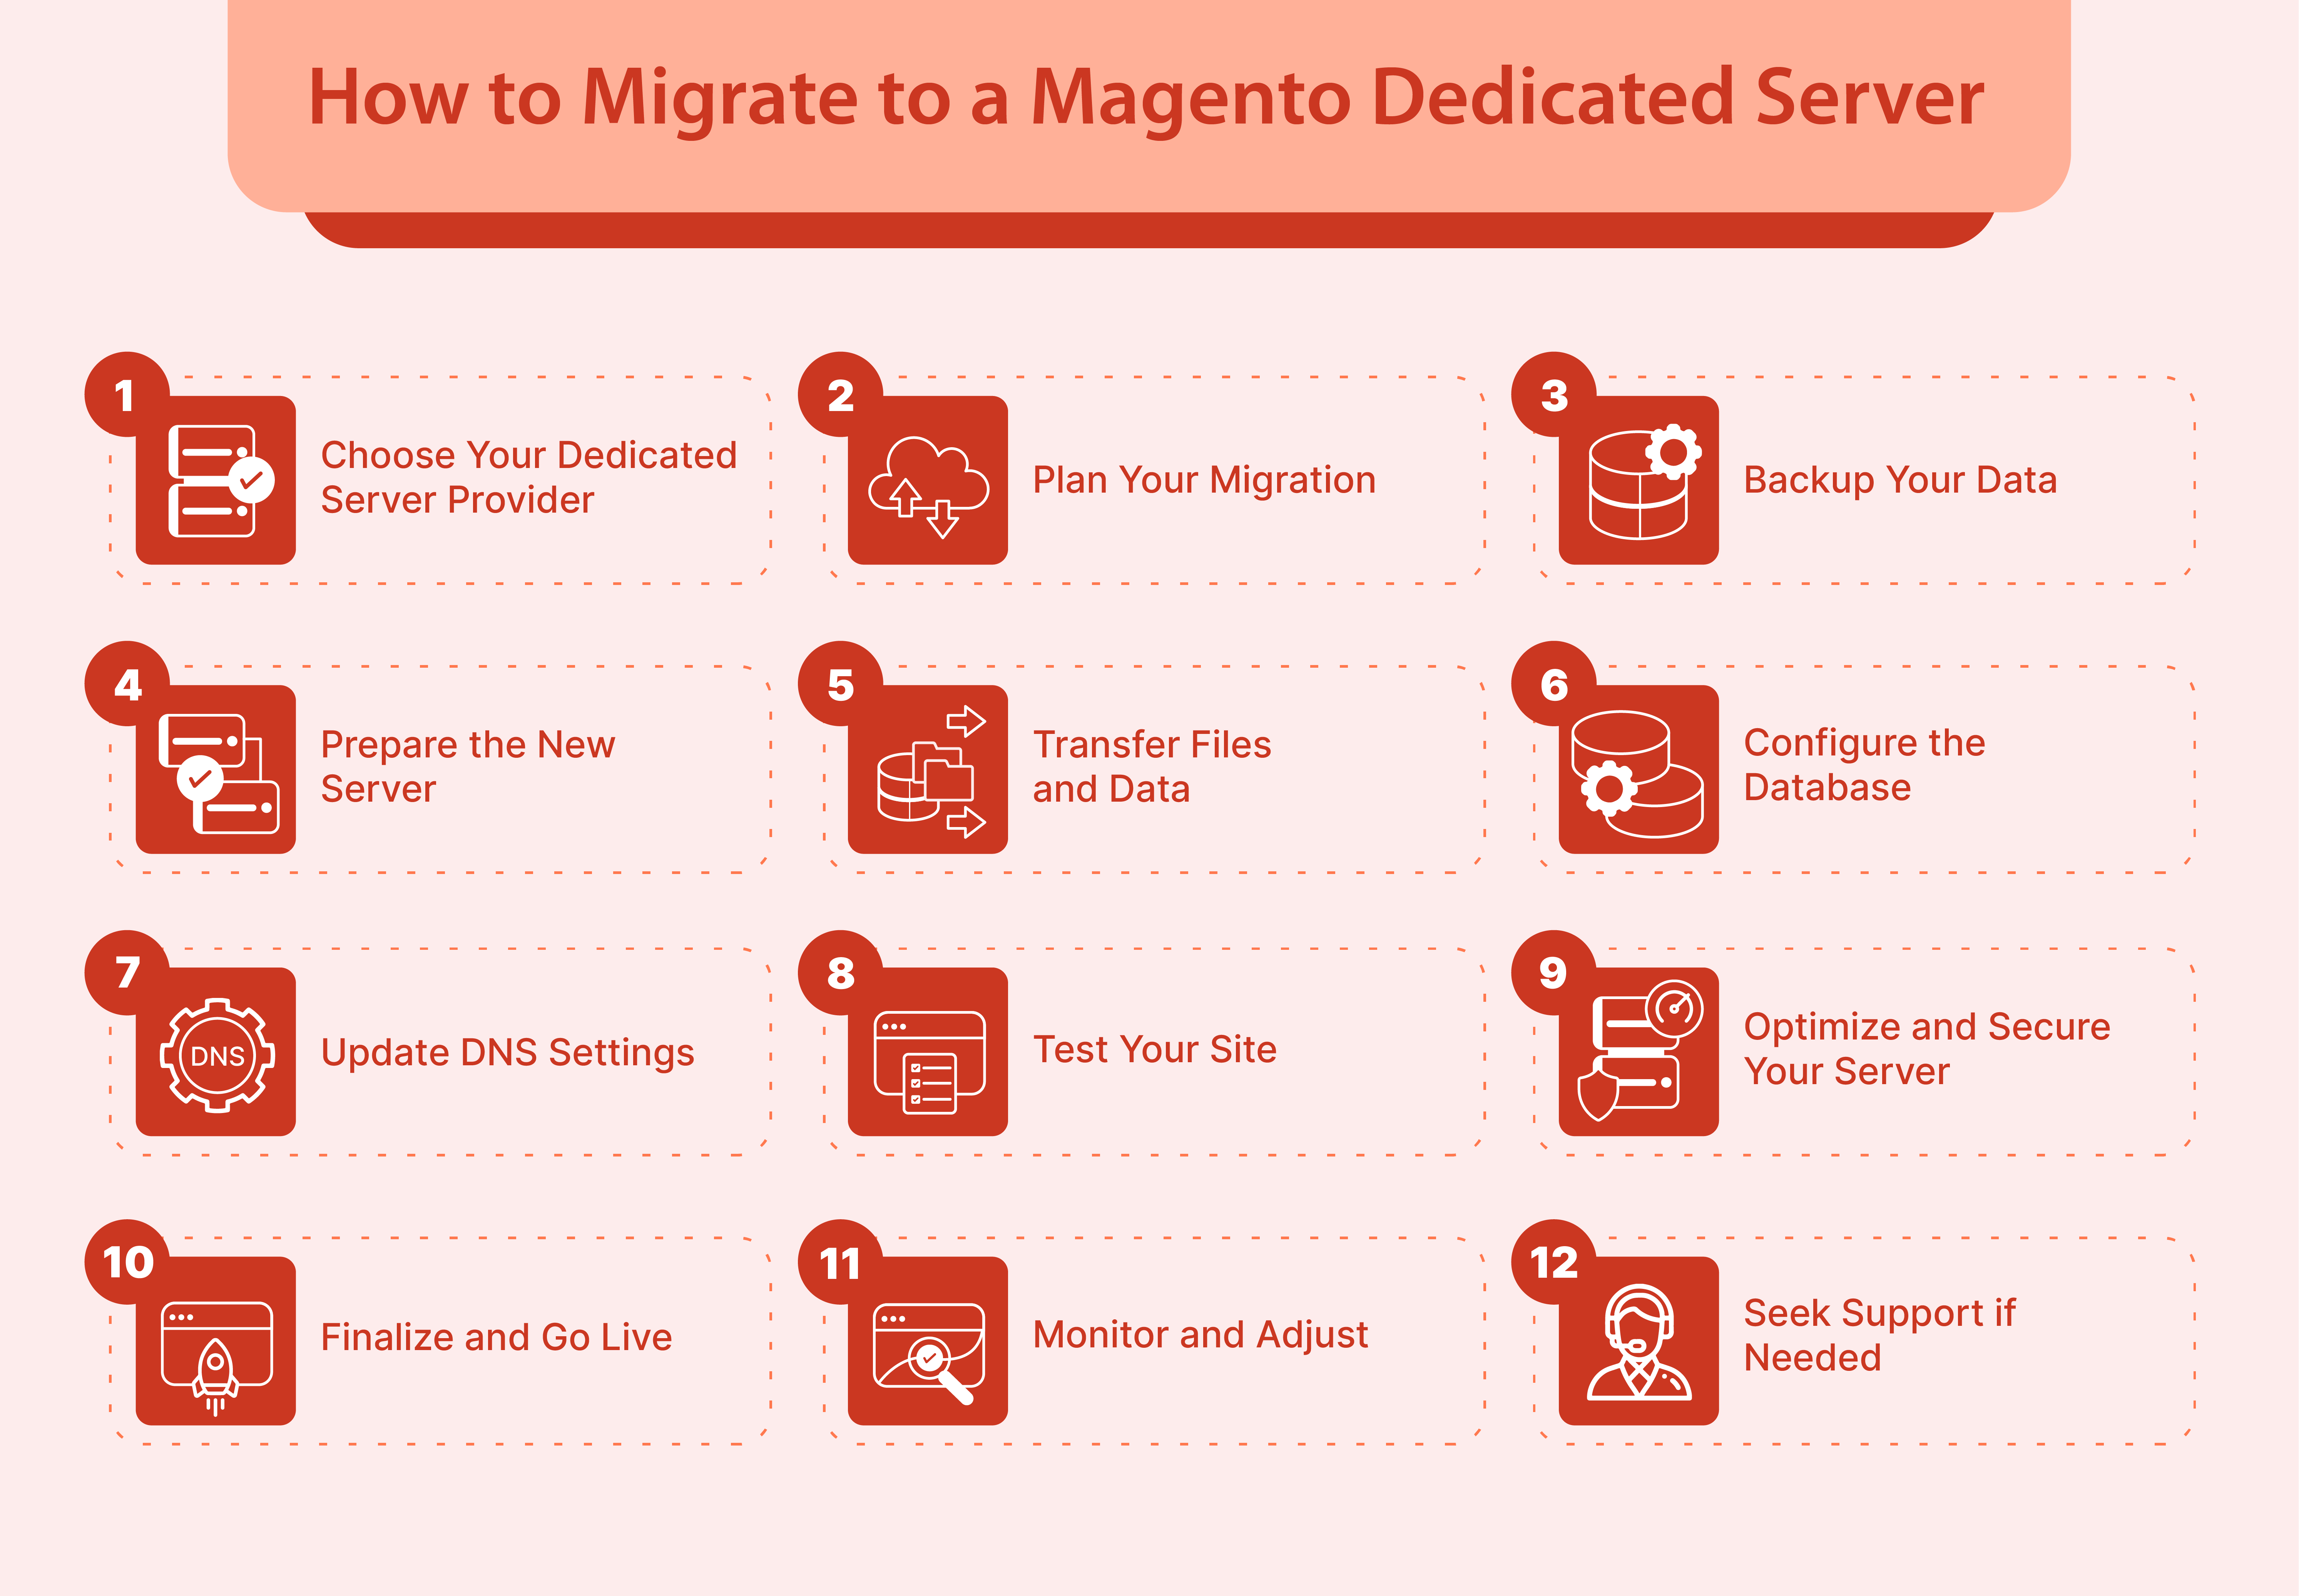 Step-by-step guide on migrating to a Magento dedicated server